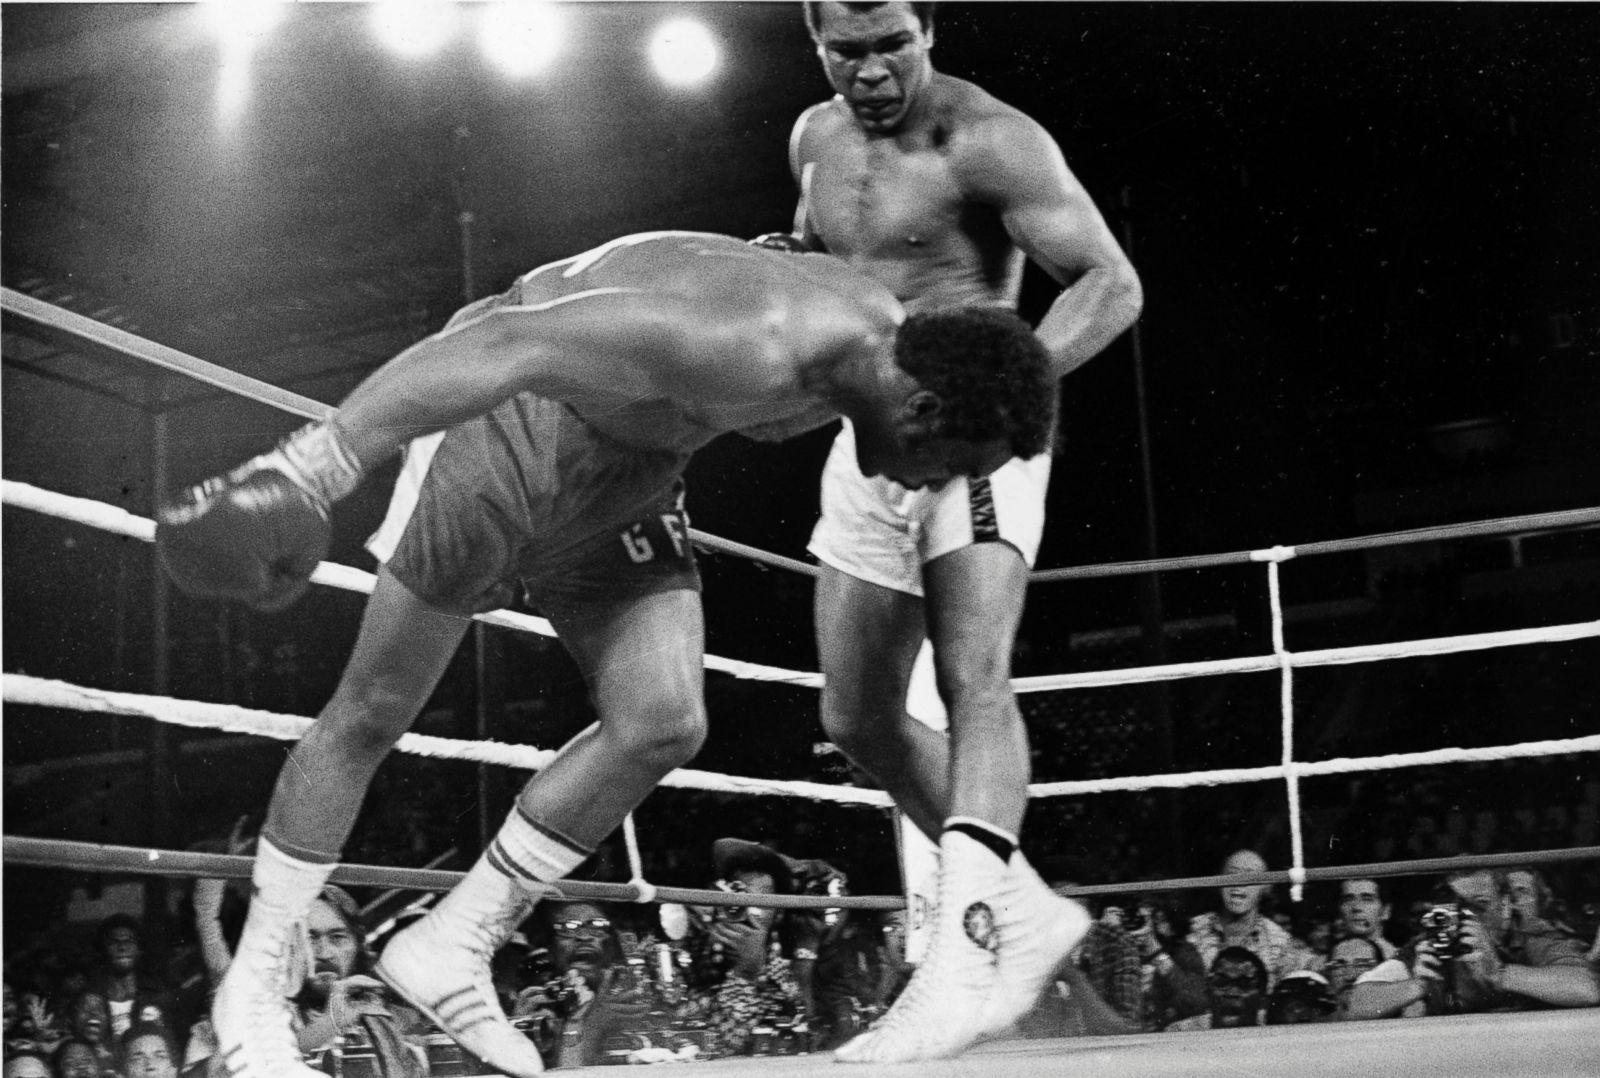 1974 BOXING MUHAMMAD ALI vs GEORGE FOREMAN RUMBLE IN THE JUNGLE 8x10 PHOTO 